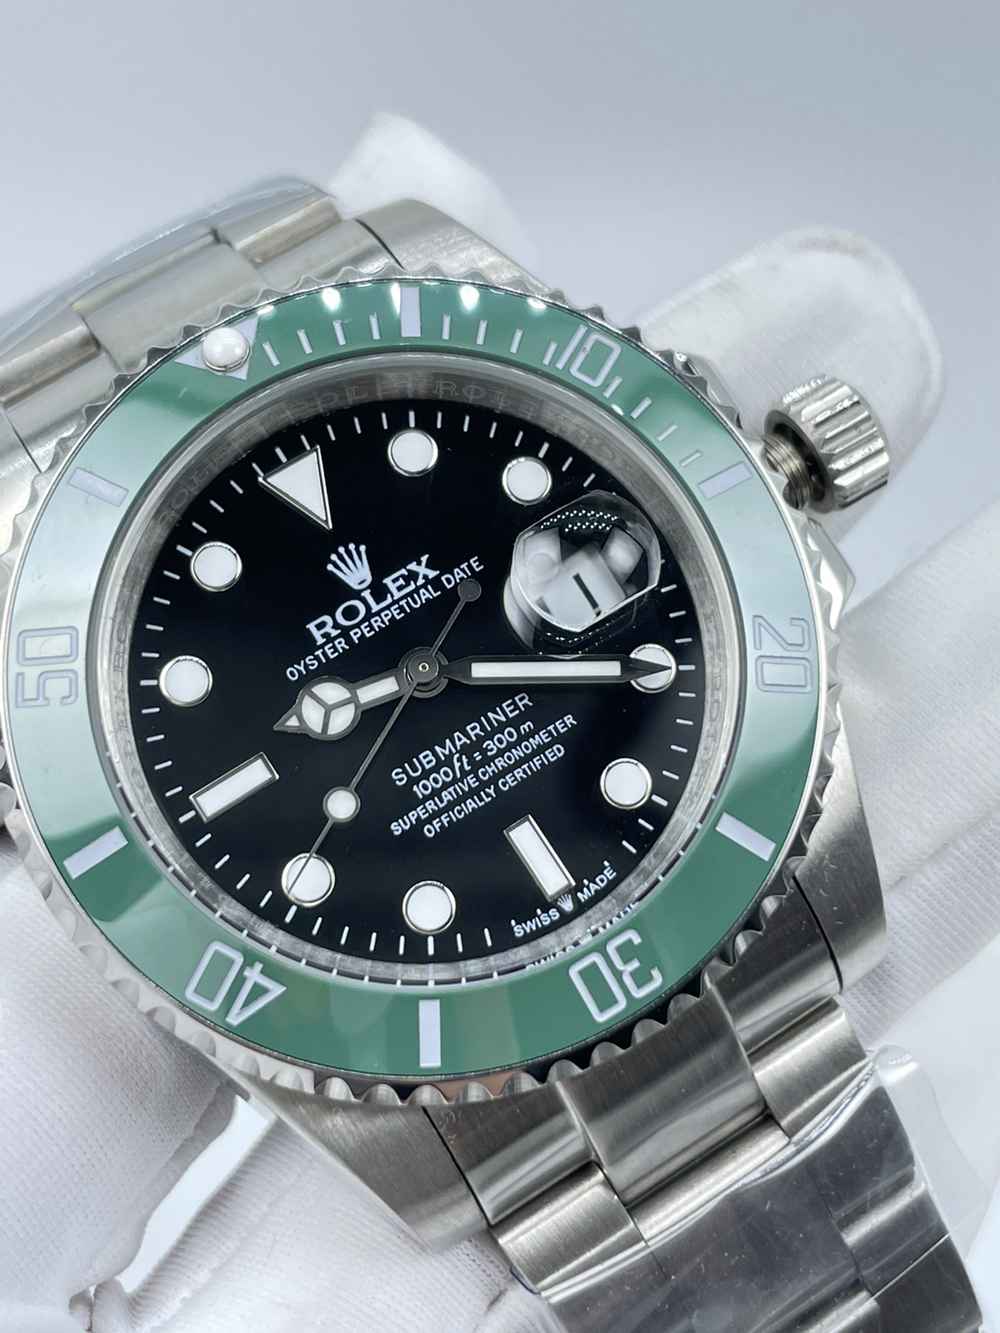 SUB 41mm green ceramic bezel black dial stainless steel AAA automatic men watch S028